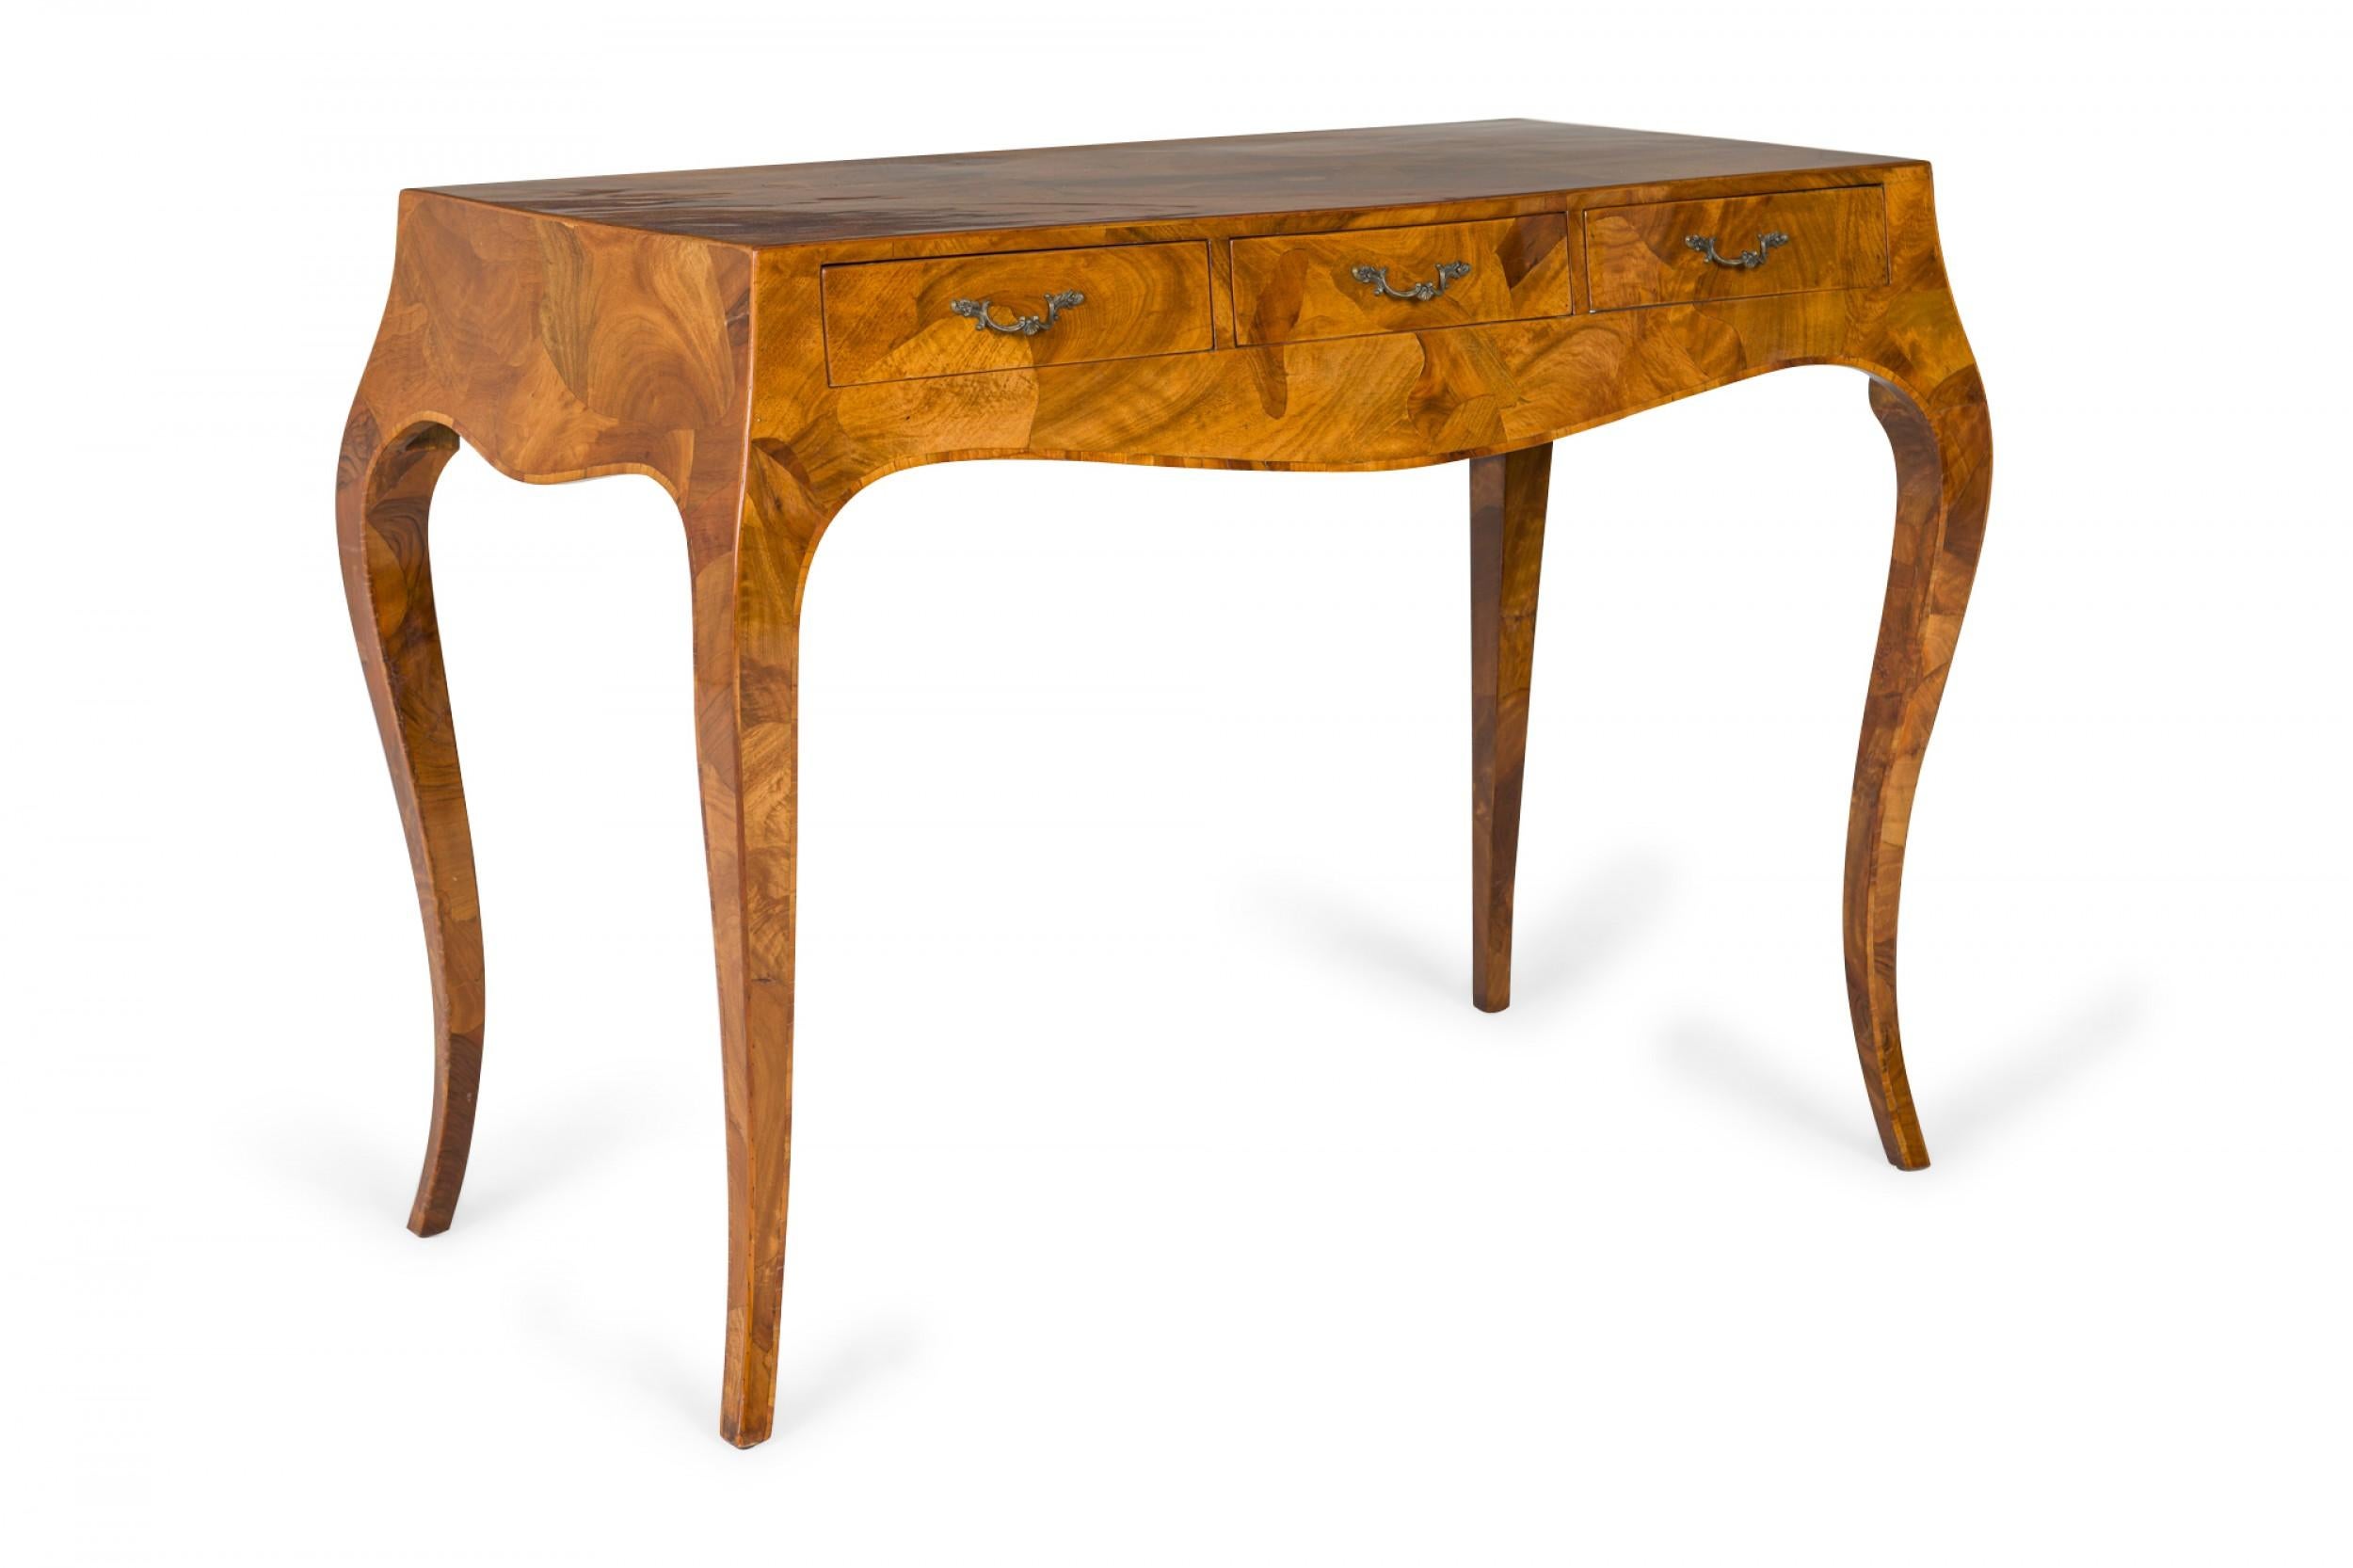 Italian Mid-Century rectangular writing desk with an oyster burl veneer and three drawers, resting on four sabre legs.